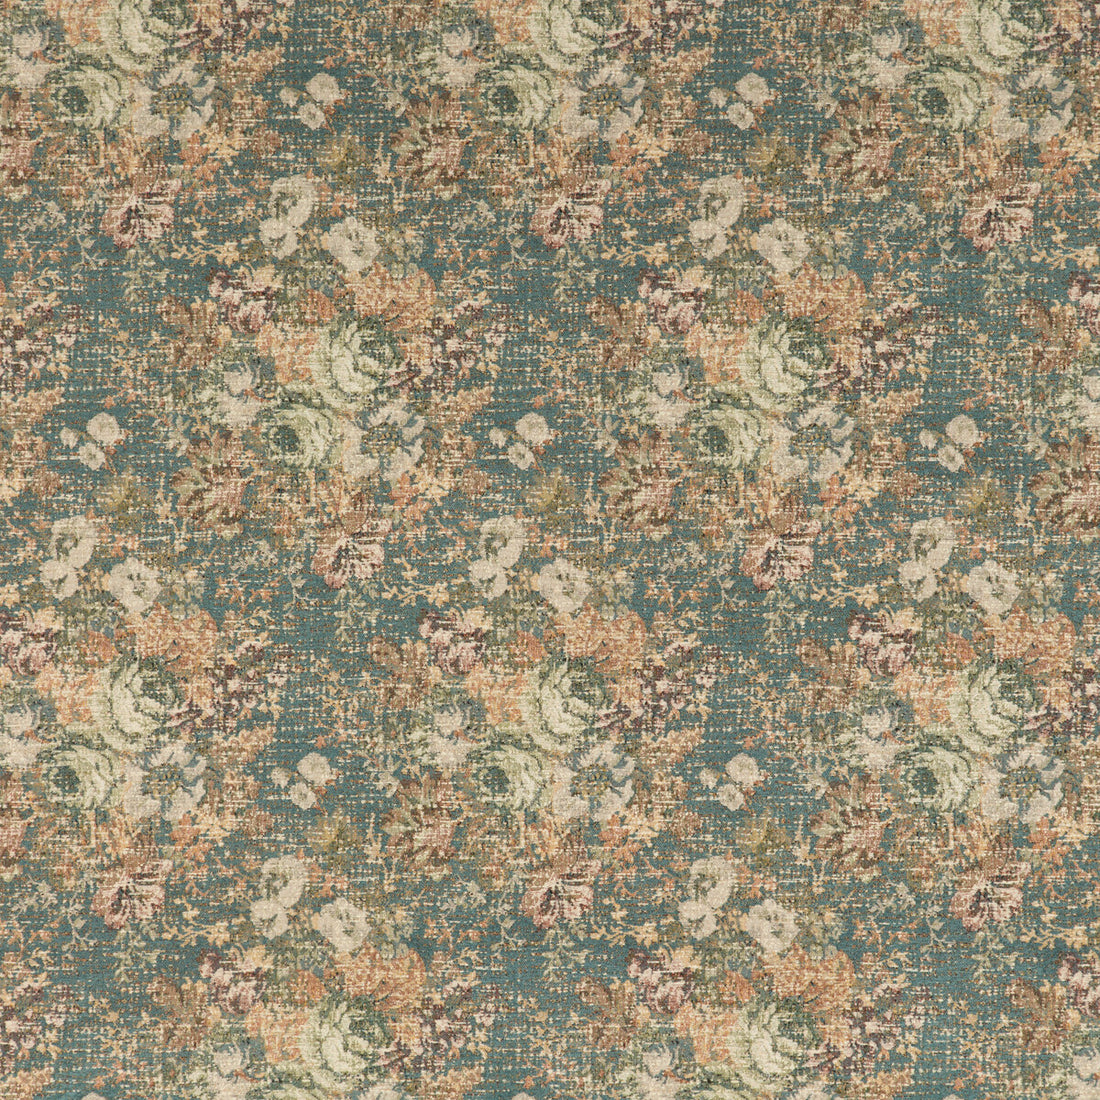 Bohemian Tapestry fabric in teal color - pattern FD725.R11.0 - by Mulberry in the Bohemian Weaves collection